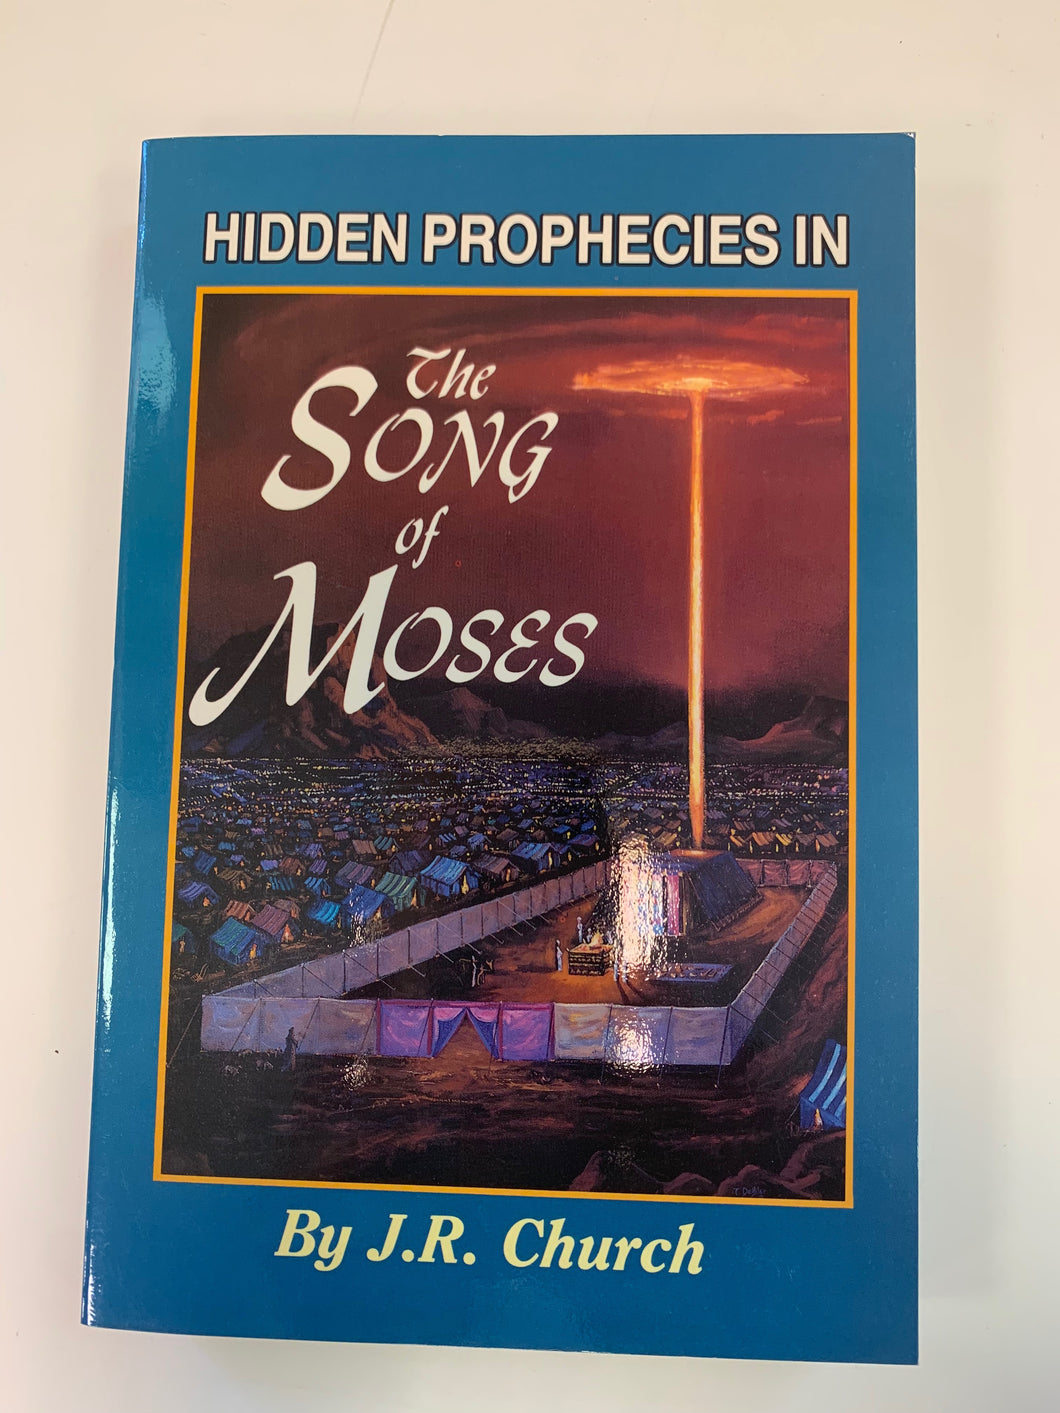 Hidden Prophecies in The Song of Moses by J. R. Church